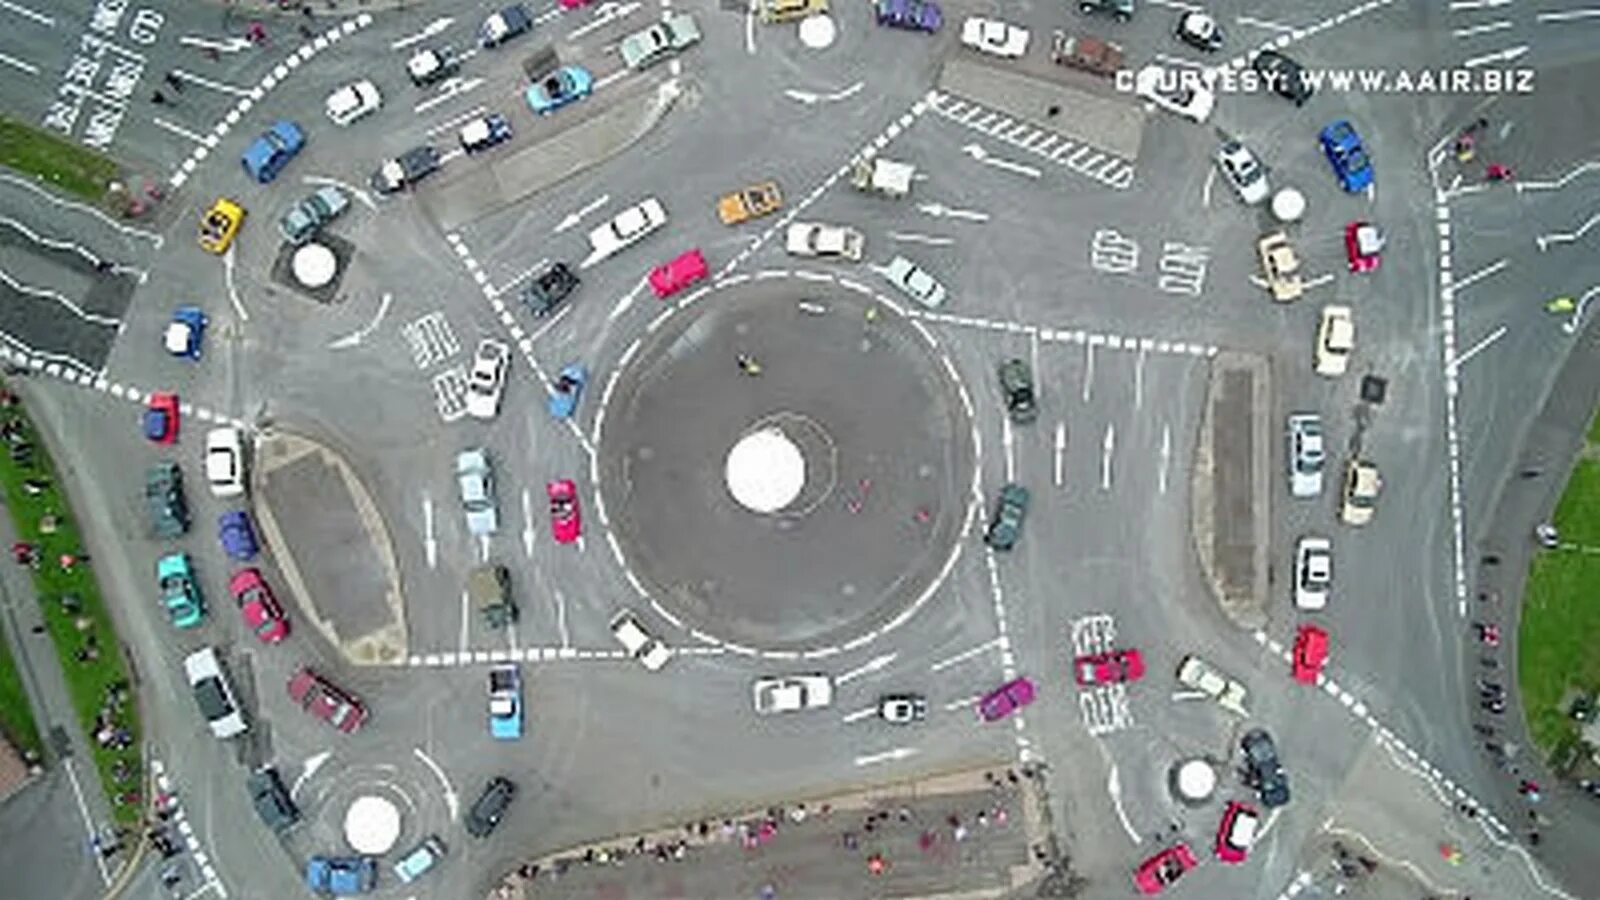 The biggest Roundabouts. Шарджа j Electronics Roundabout. The biggest Roundabout in the World. Roundabouts in London. Huge round